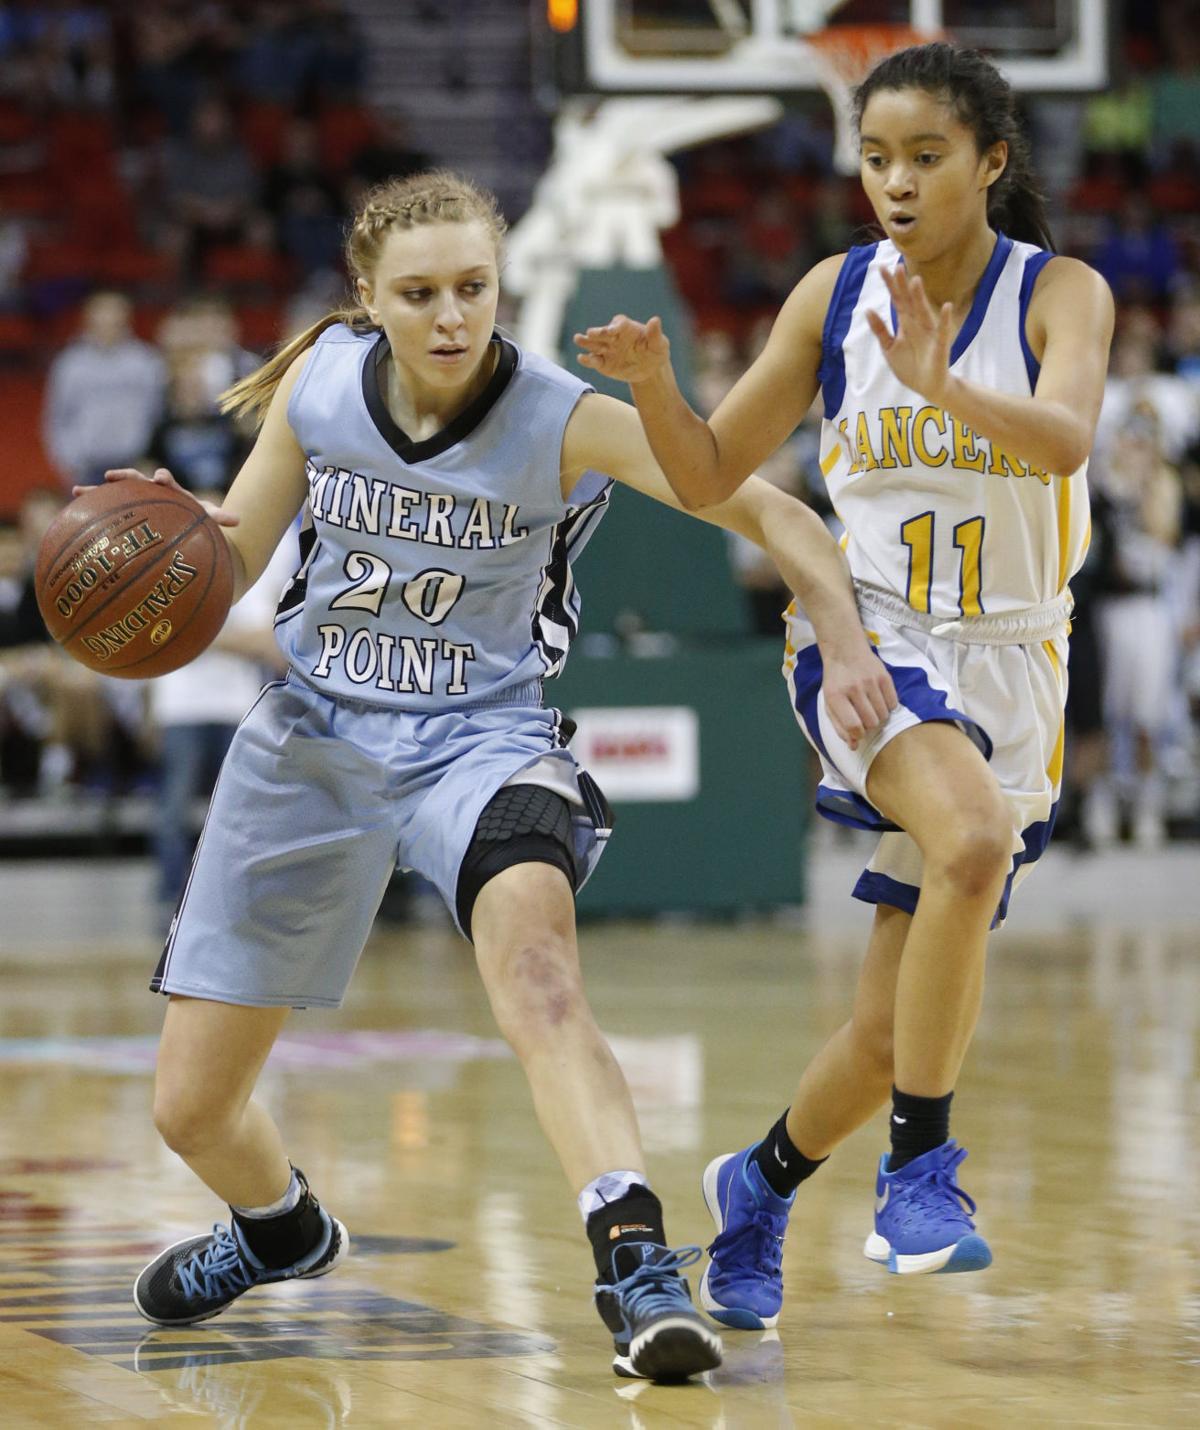 WIAA state girls basketball With a dominating finish, Mineral Point